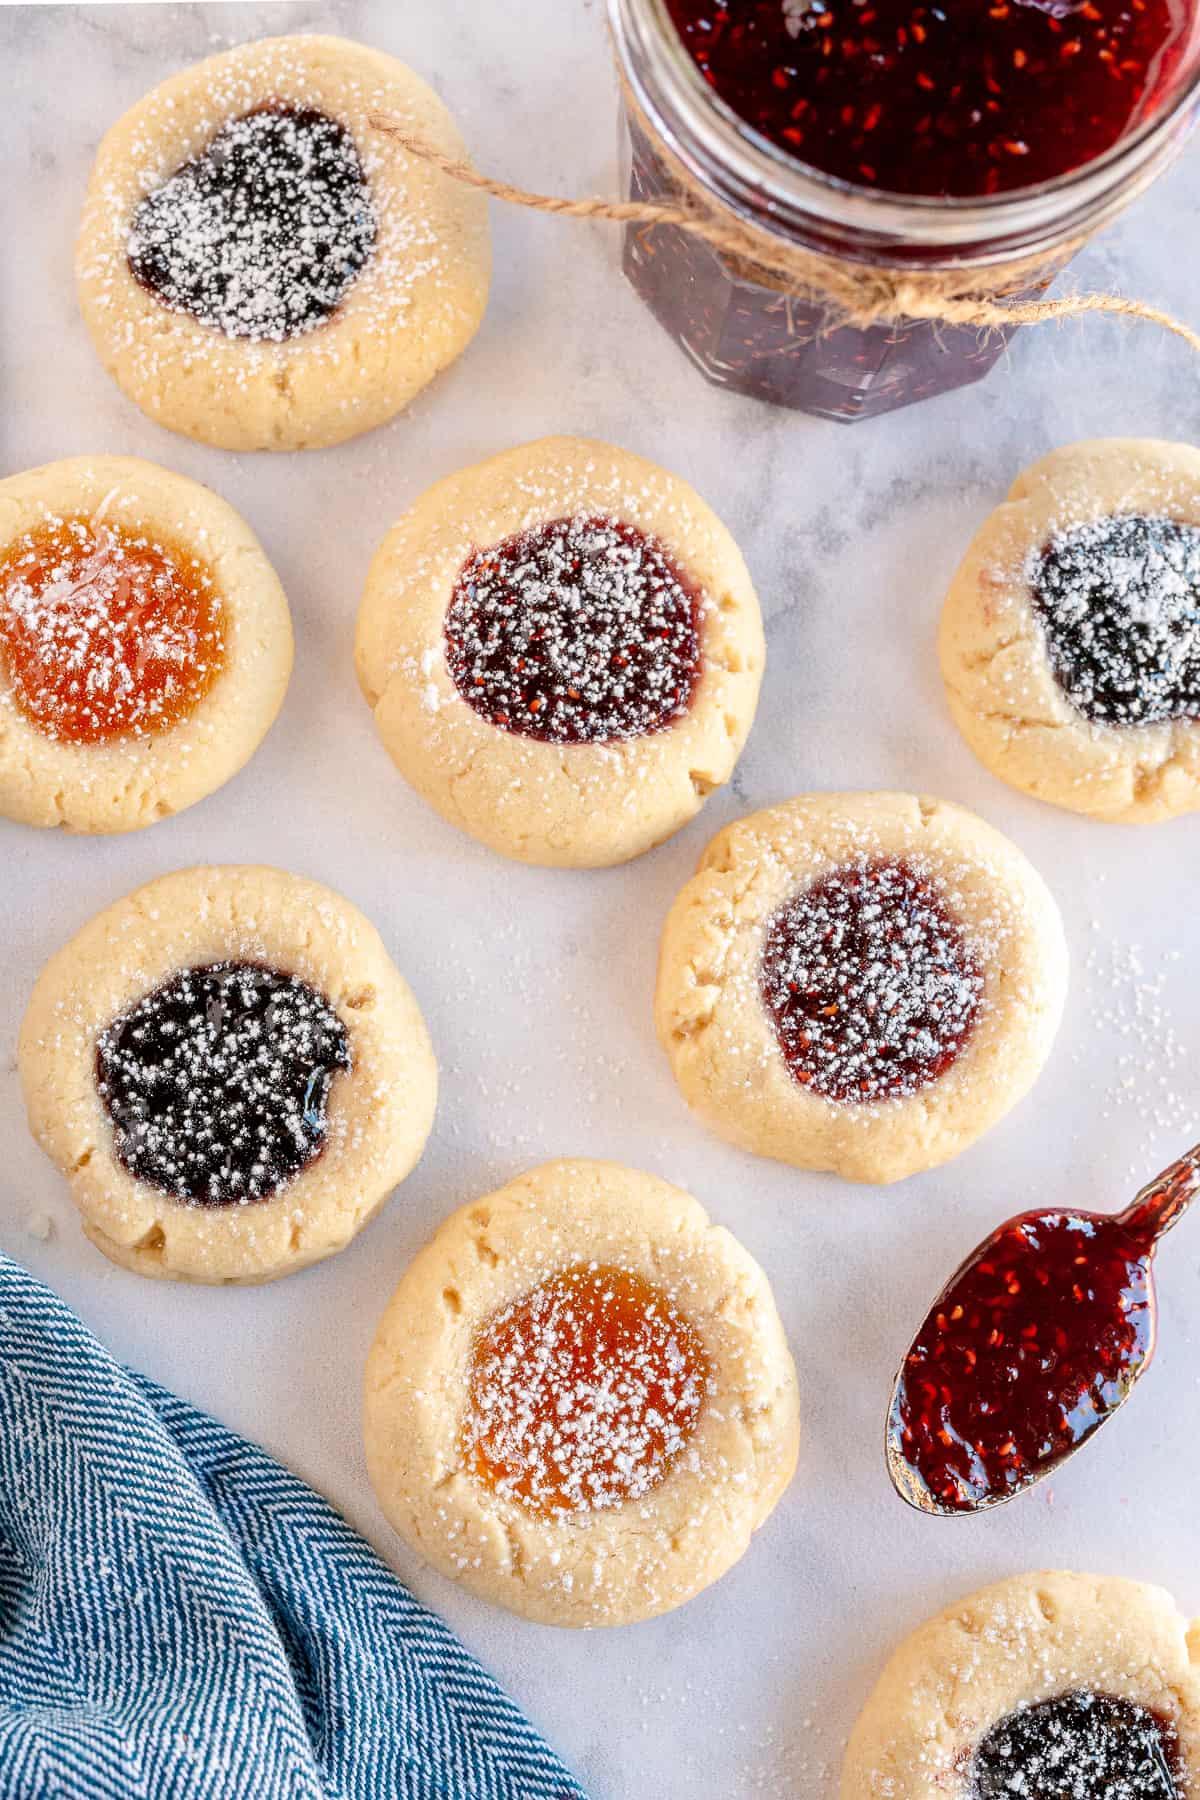 Jam filled thumbprints dusted with powdered sugar.